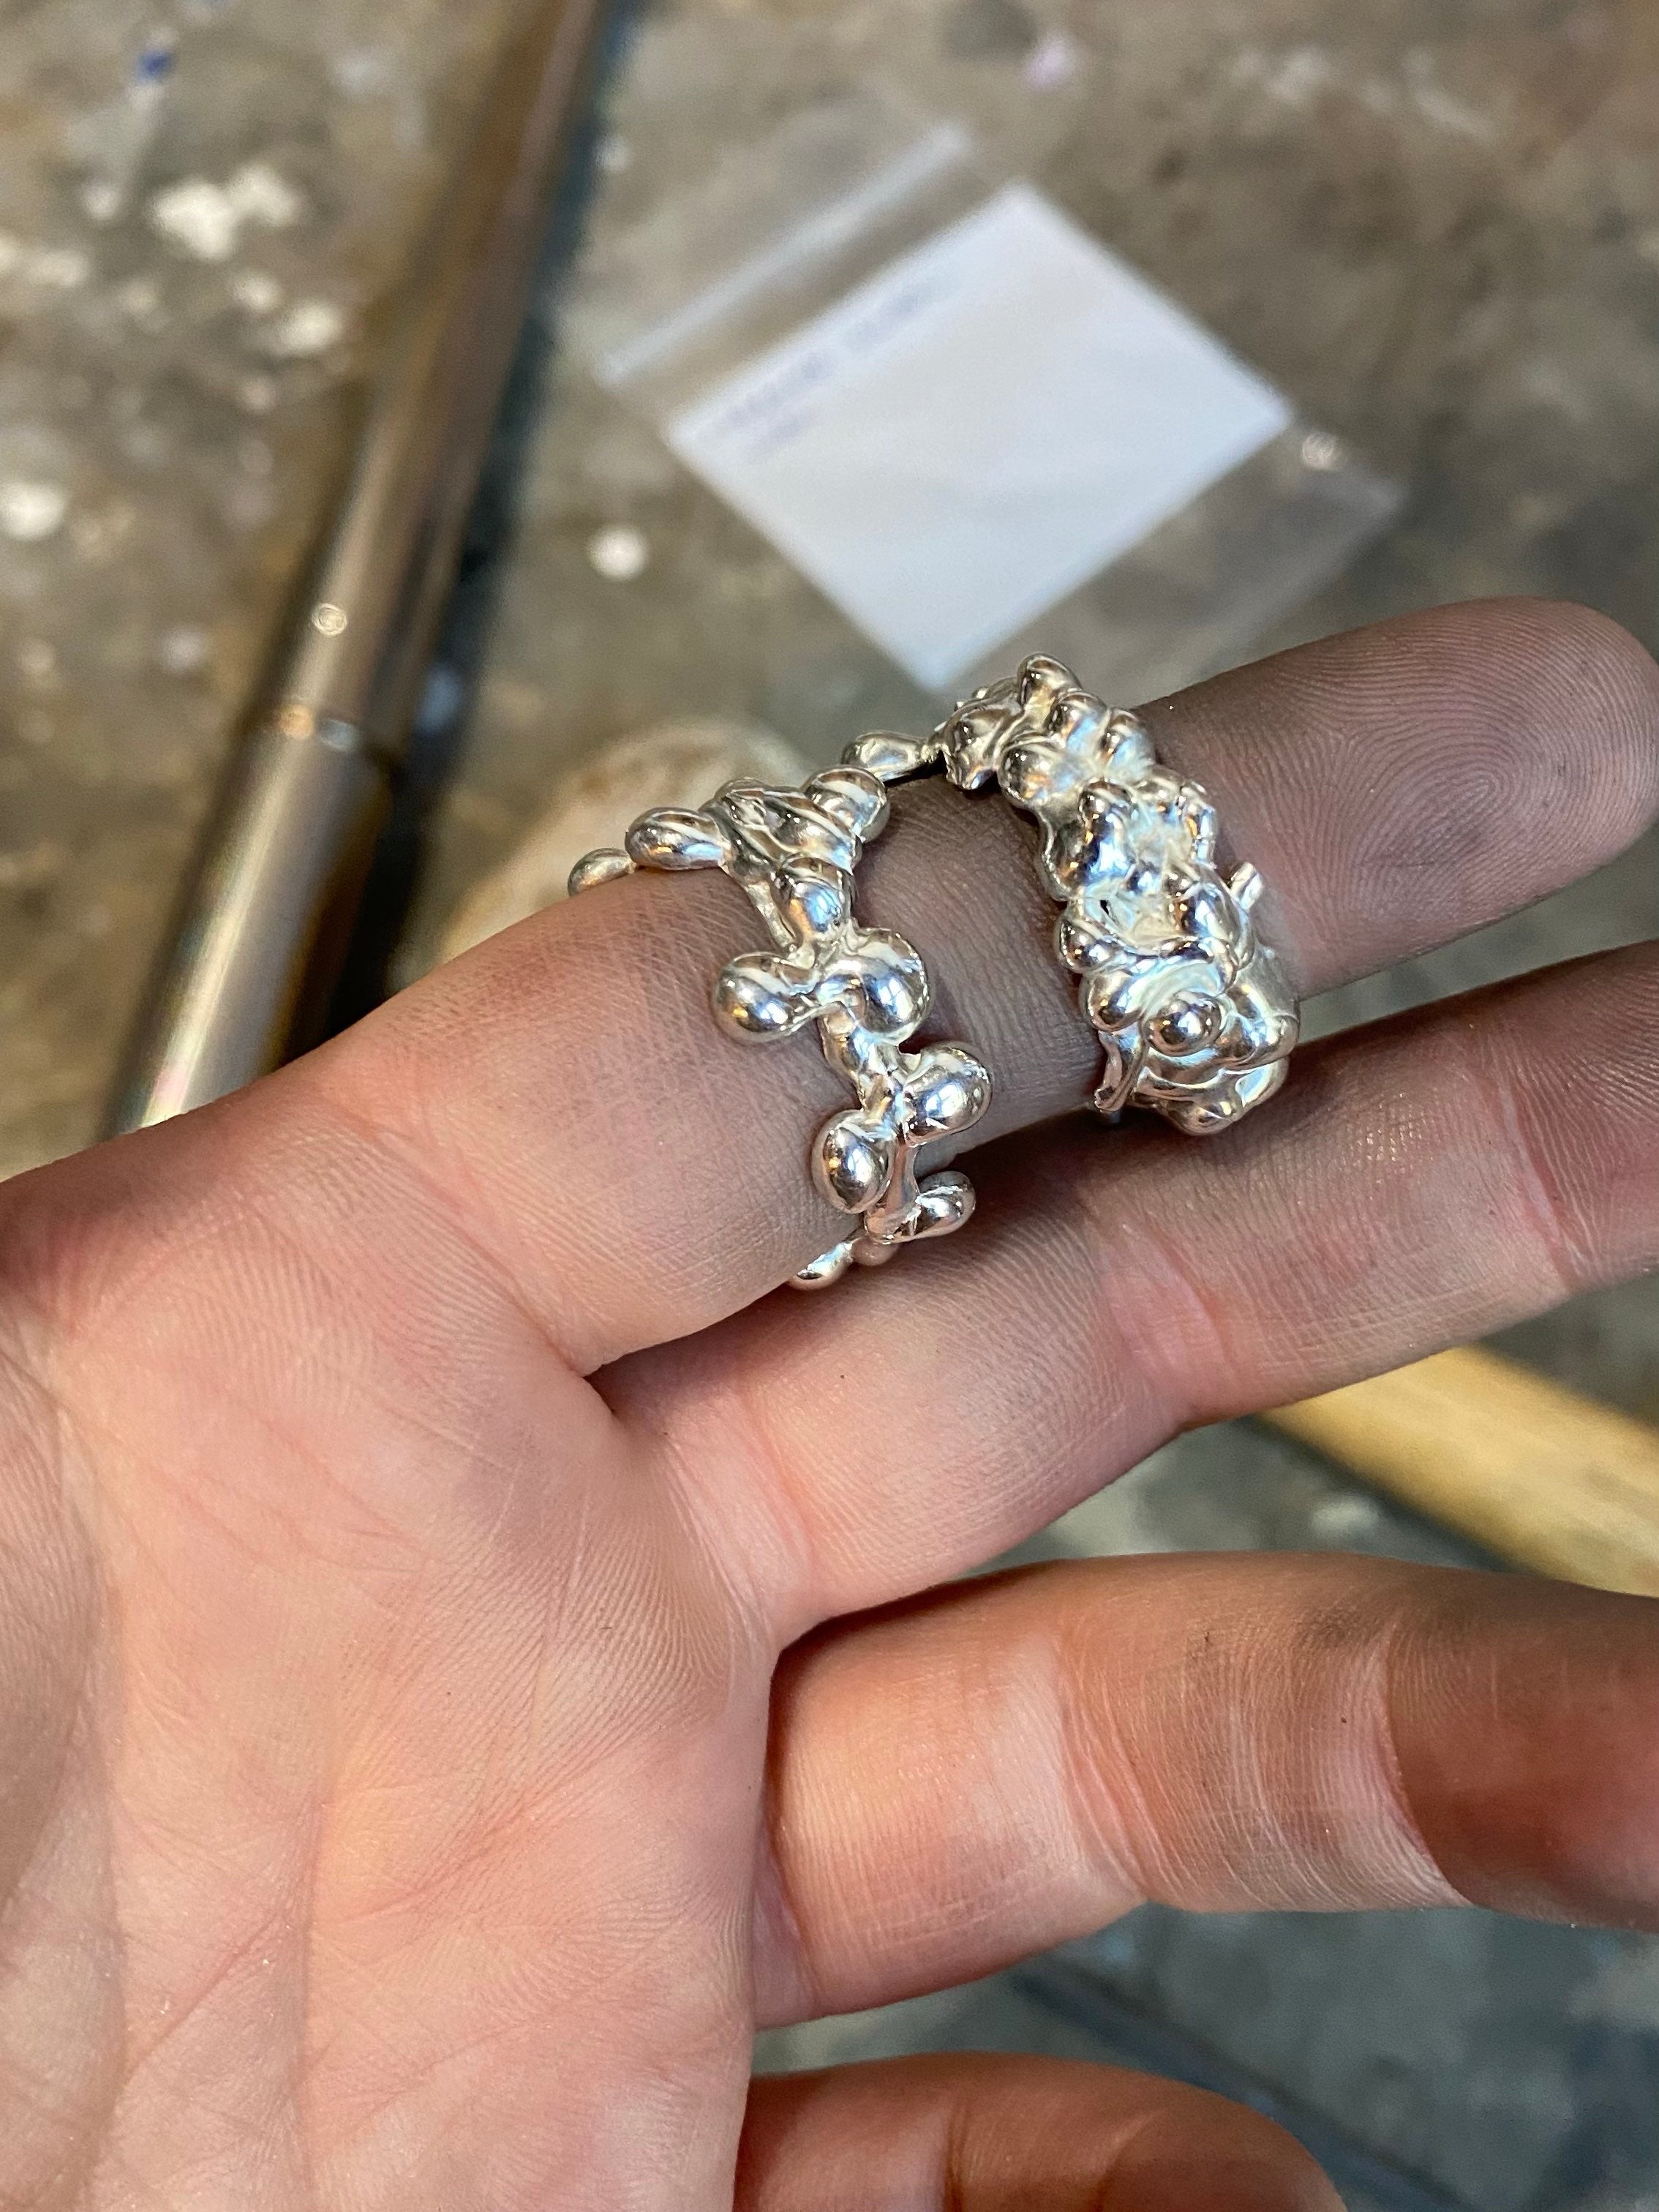 2 silver textured and abstract rings on finger